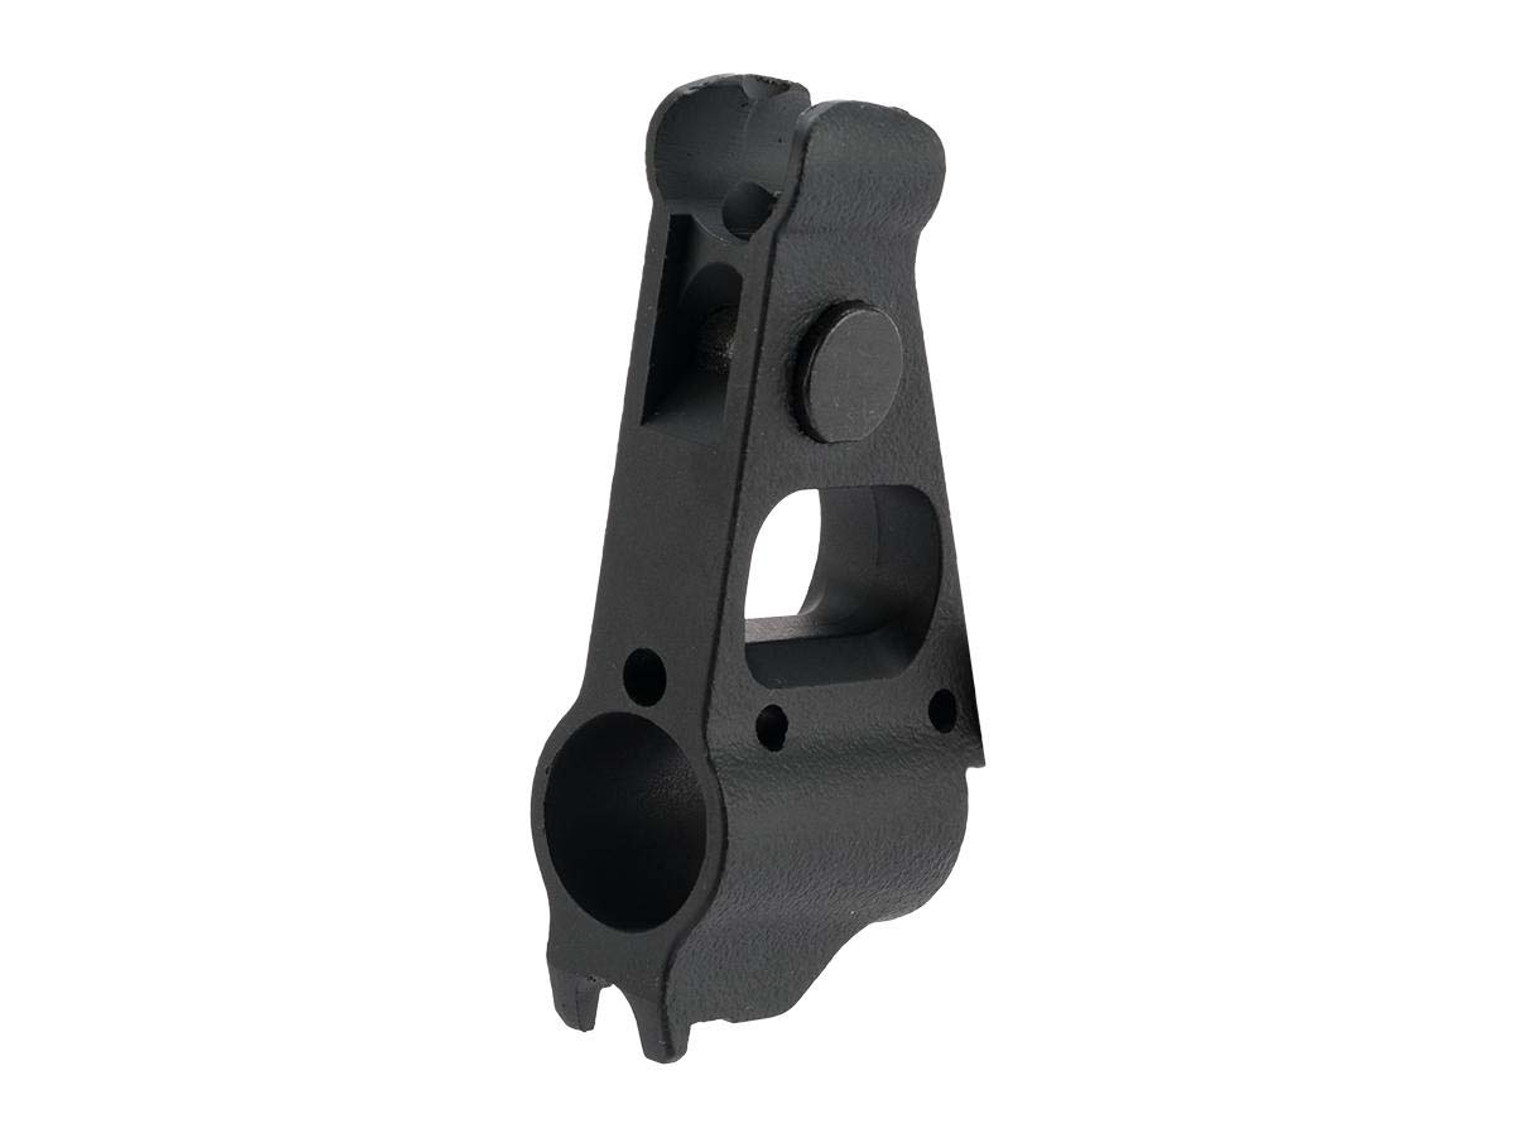 Front Sight Assembly for CYMA AK/RPK Series Airsoft AEG Rifles